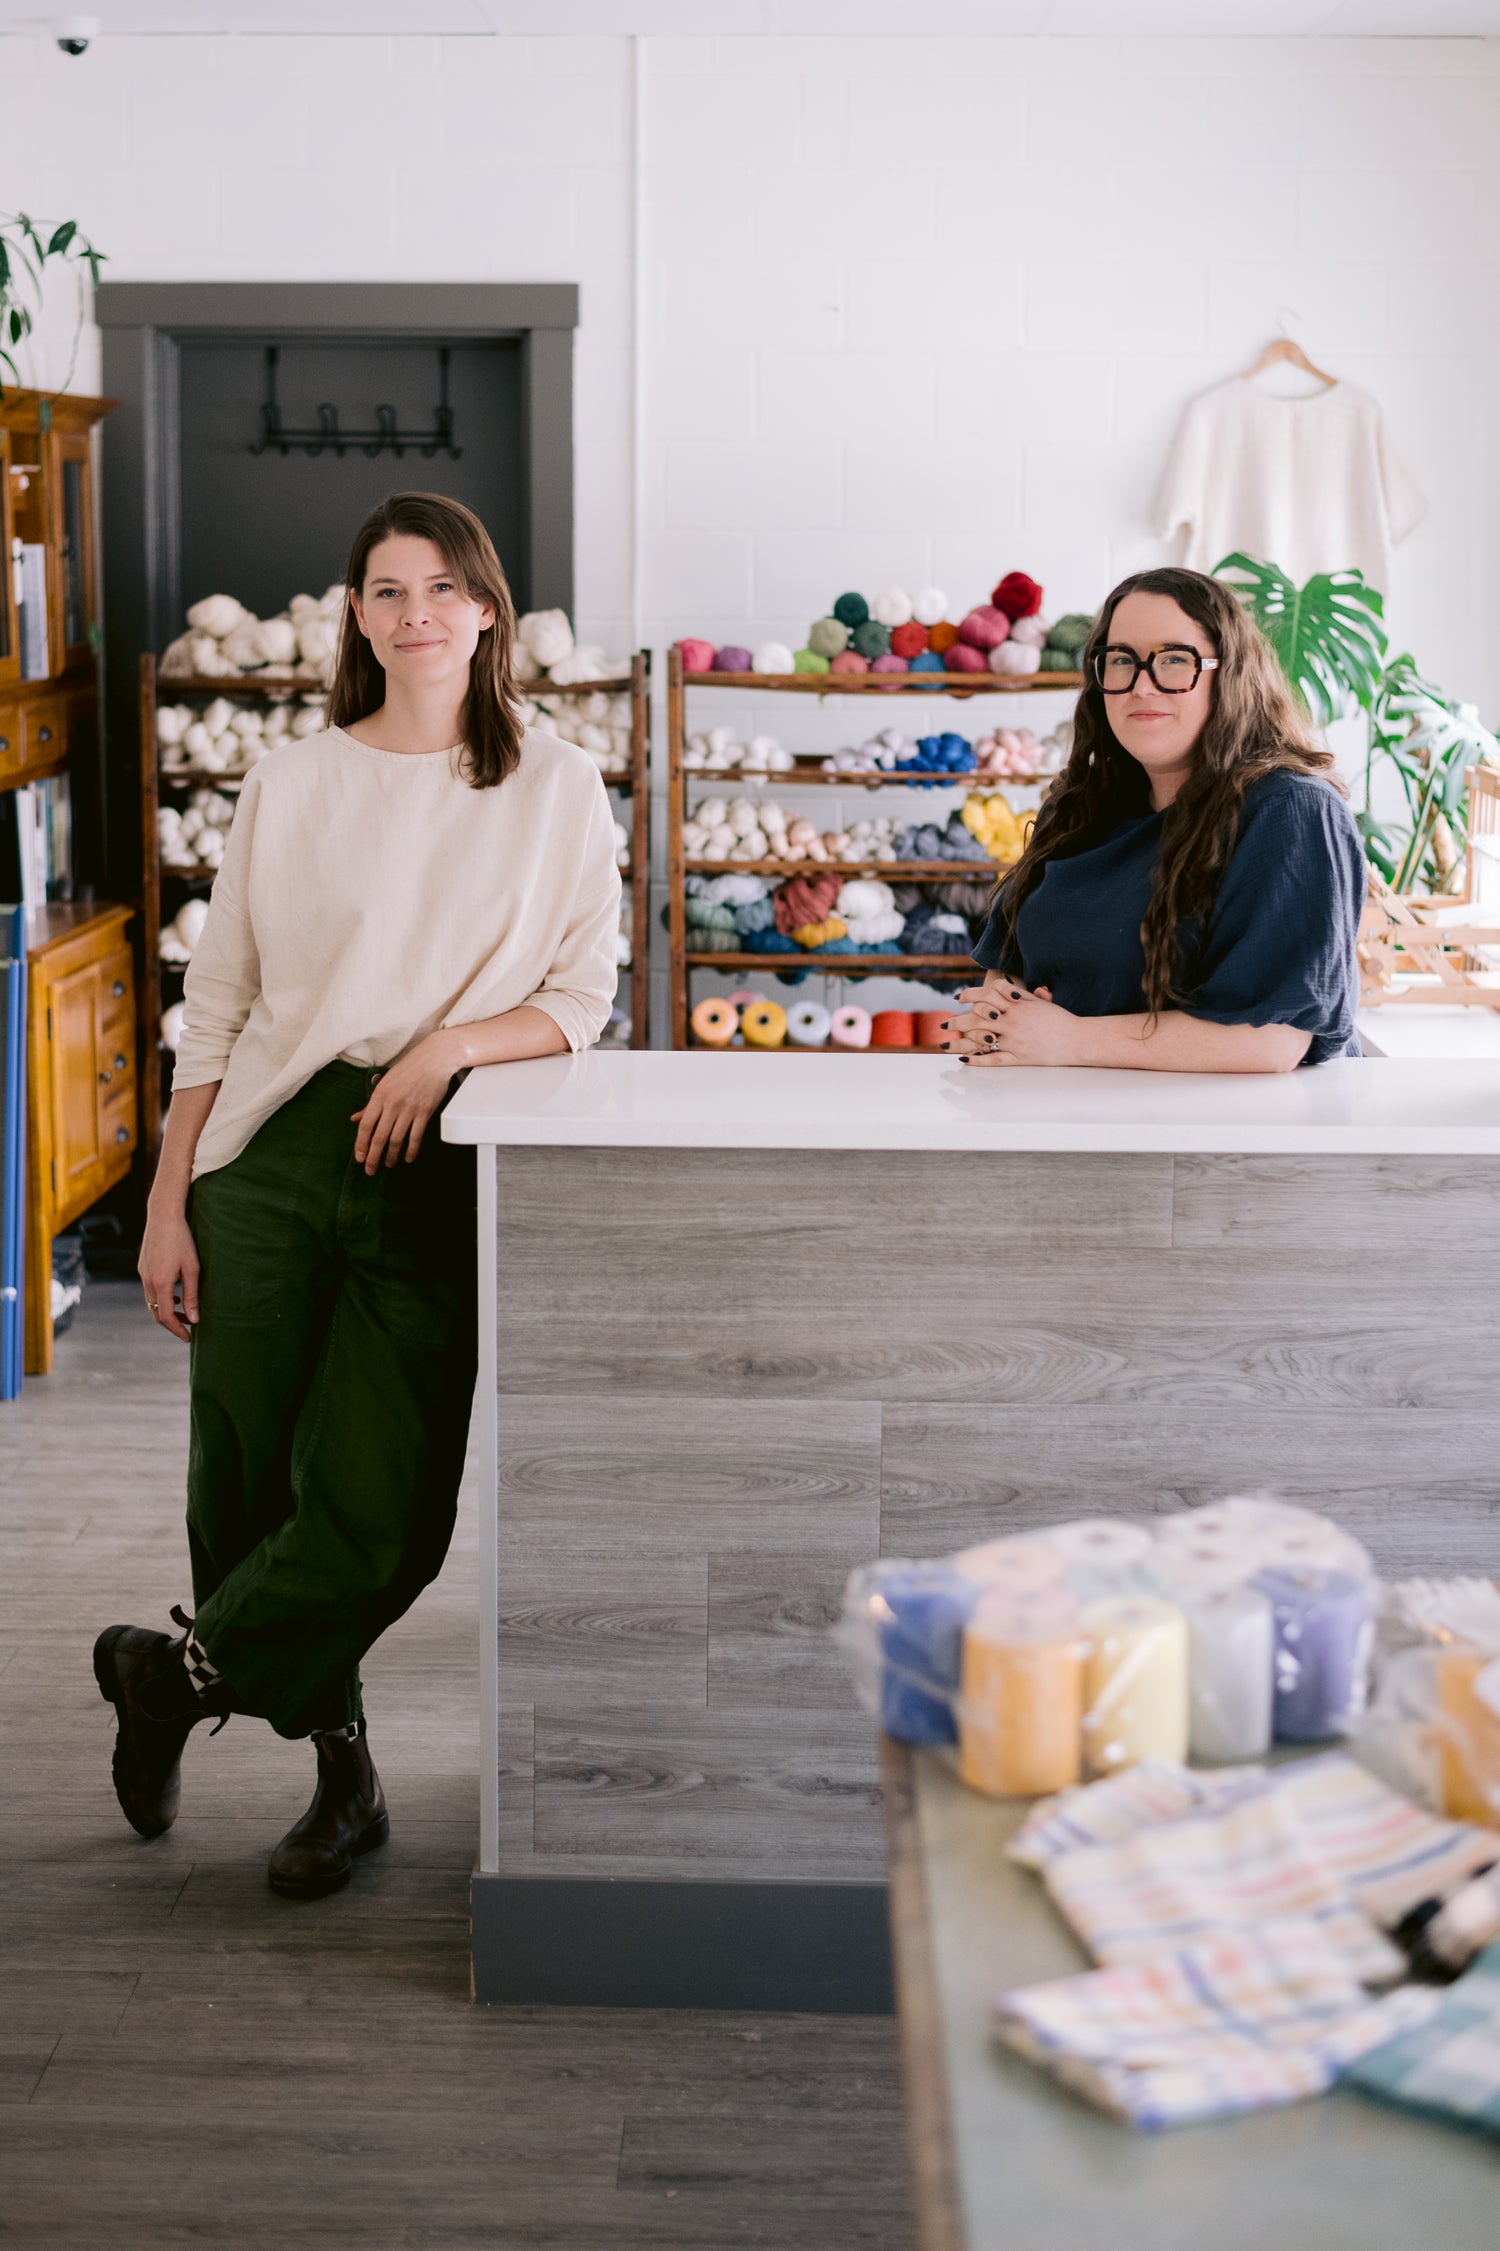 Gather Textiles was founded in 2019